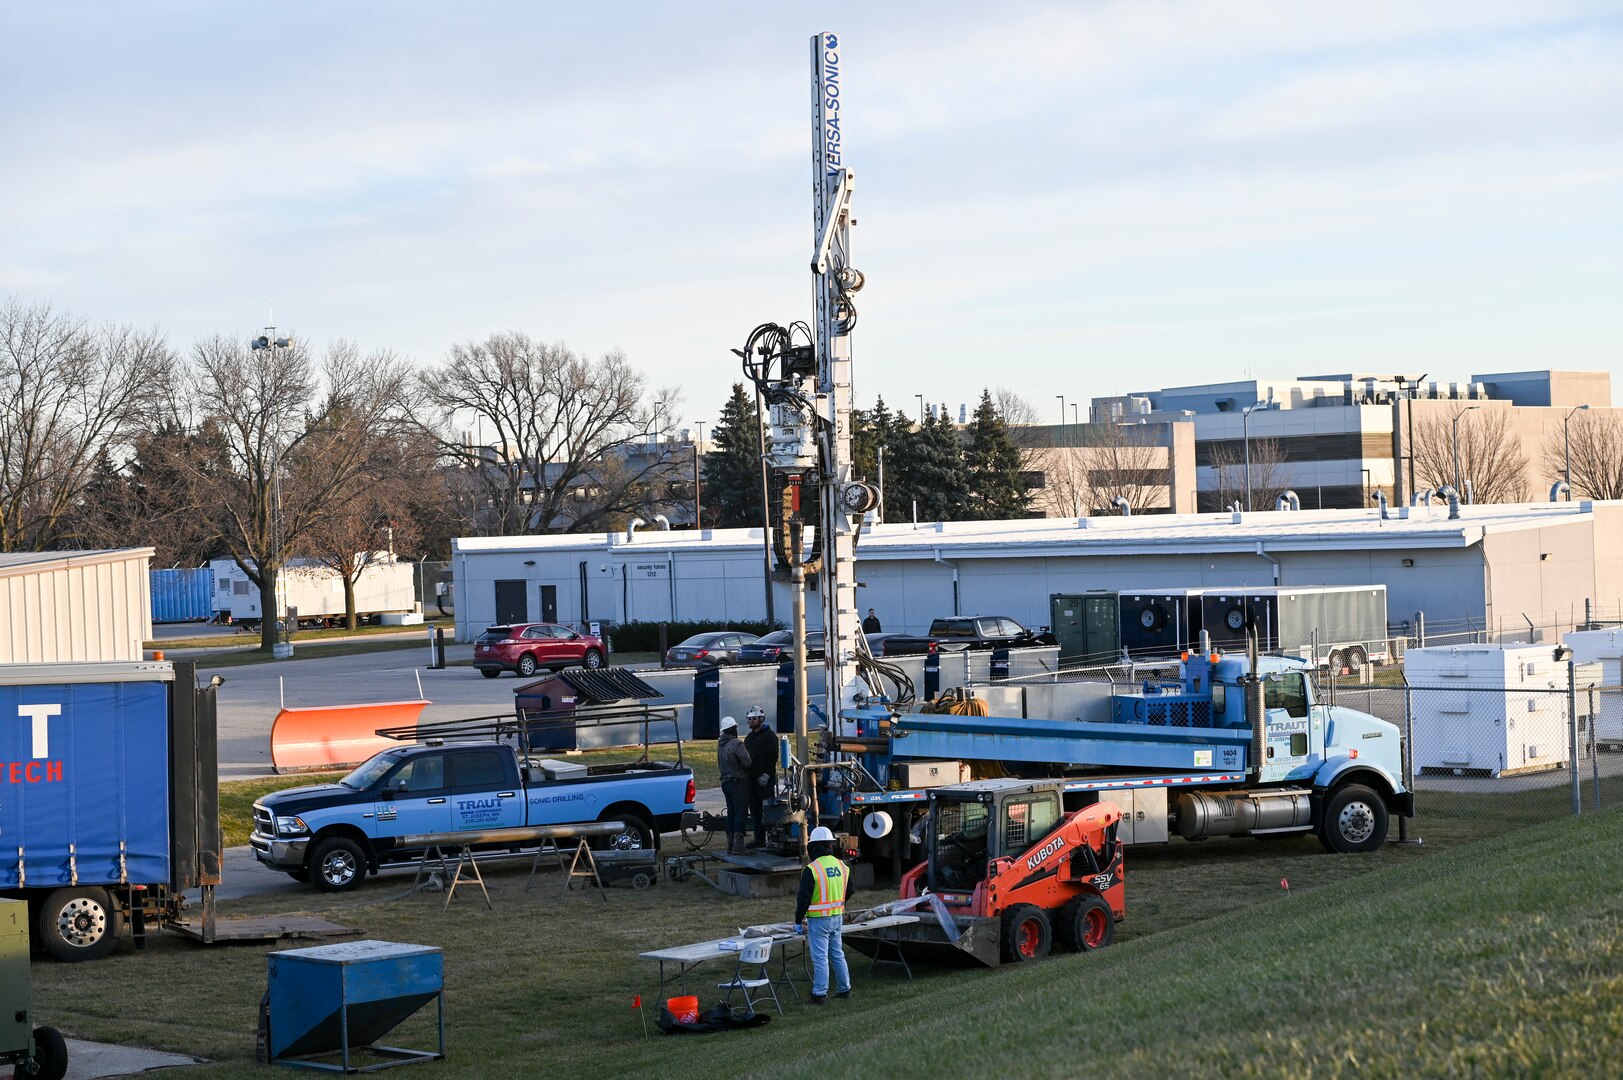 Employees of Traut Companies and a geologist with EA Engineering, Science, and Technology, Inc. install a permanent monitoring well during a remedial investigation into the presence of Per- and Polyfluoroalkyl substances at Truax Field in Madison, Wisconsin, Dec. 13, 2023. The investigation marks the second major step in the Environmental Protection Agency’s Comprehensive Environmental Response, Compensation, and Liability Act process which will guide the mitigation of PFAS compounds on and around the Air National Guard installation. (U.S. Air National Guard photo by Isabella Jansen)